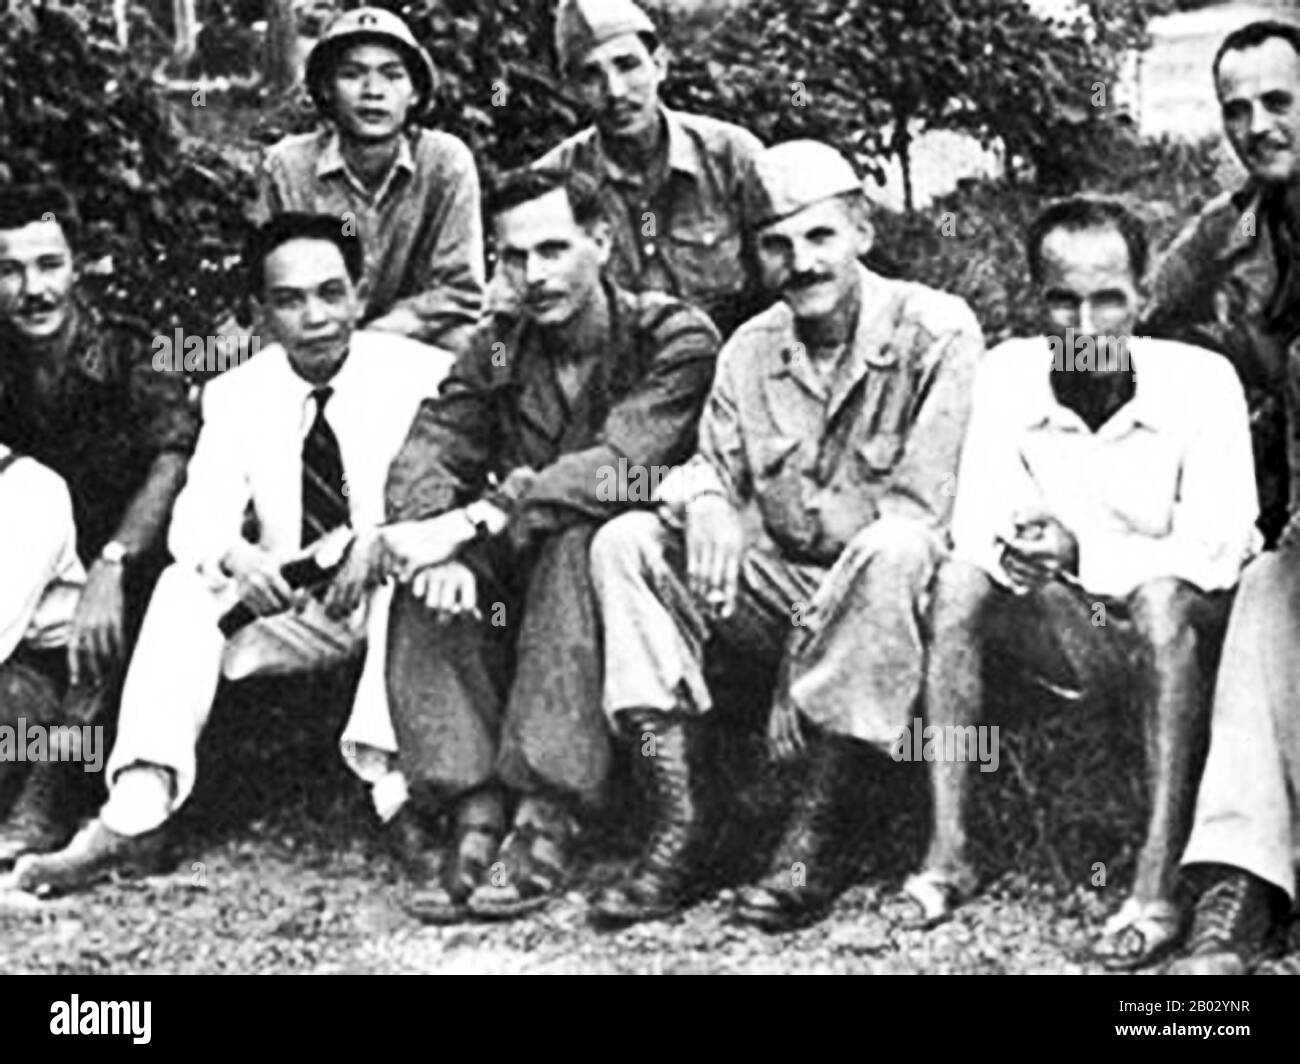 Dewey arrived on September 4, 1945 in Saigon to head a seven-man OSS team 'to represent American interests' and collect intelligence. Working with the Viet Minh, he arranged the repatriation of 4,549 Allied POWs, including 240 Americans, from two Japanese camps near Saigon, code named Project Embankment. Because the British occupation forces who had arrived to accept the Japanese surrender were short of troops, they armed French POWs on September 22 to protect the city from a potential Viet Minh attack. In taking control of the city, the French soldiers were quick to beat or shoot Vietnamese w Stock Photo